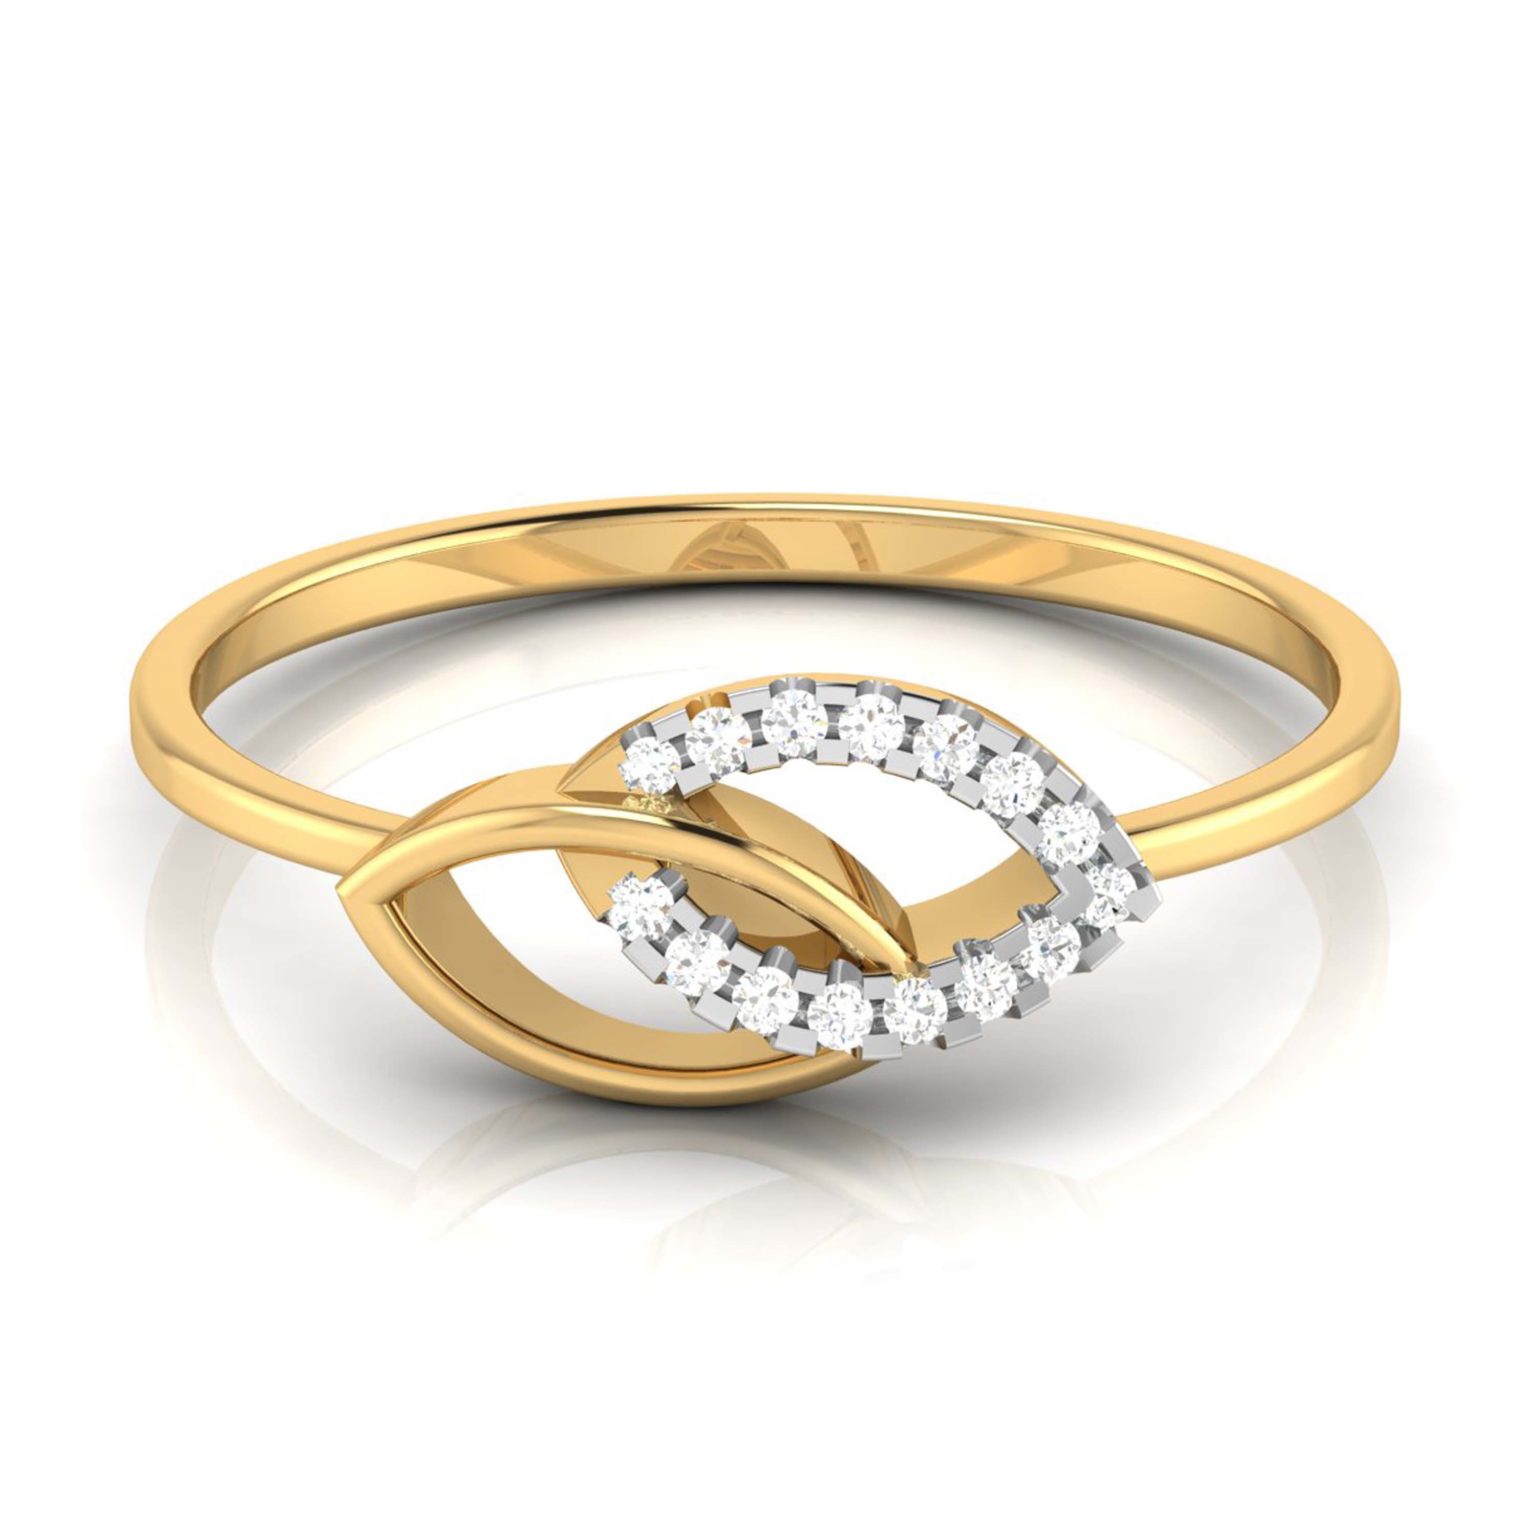 Wring Ring Collection – 18 KT – RMDG ADR – 1970